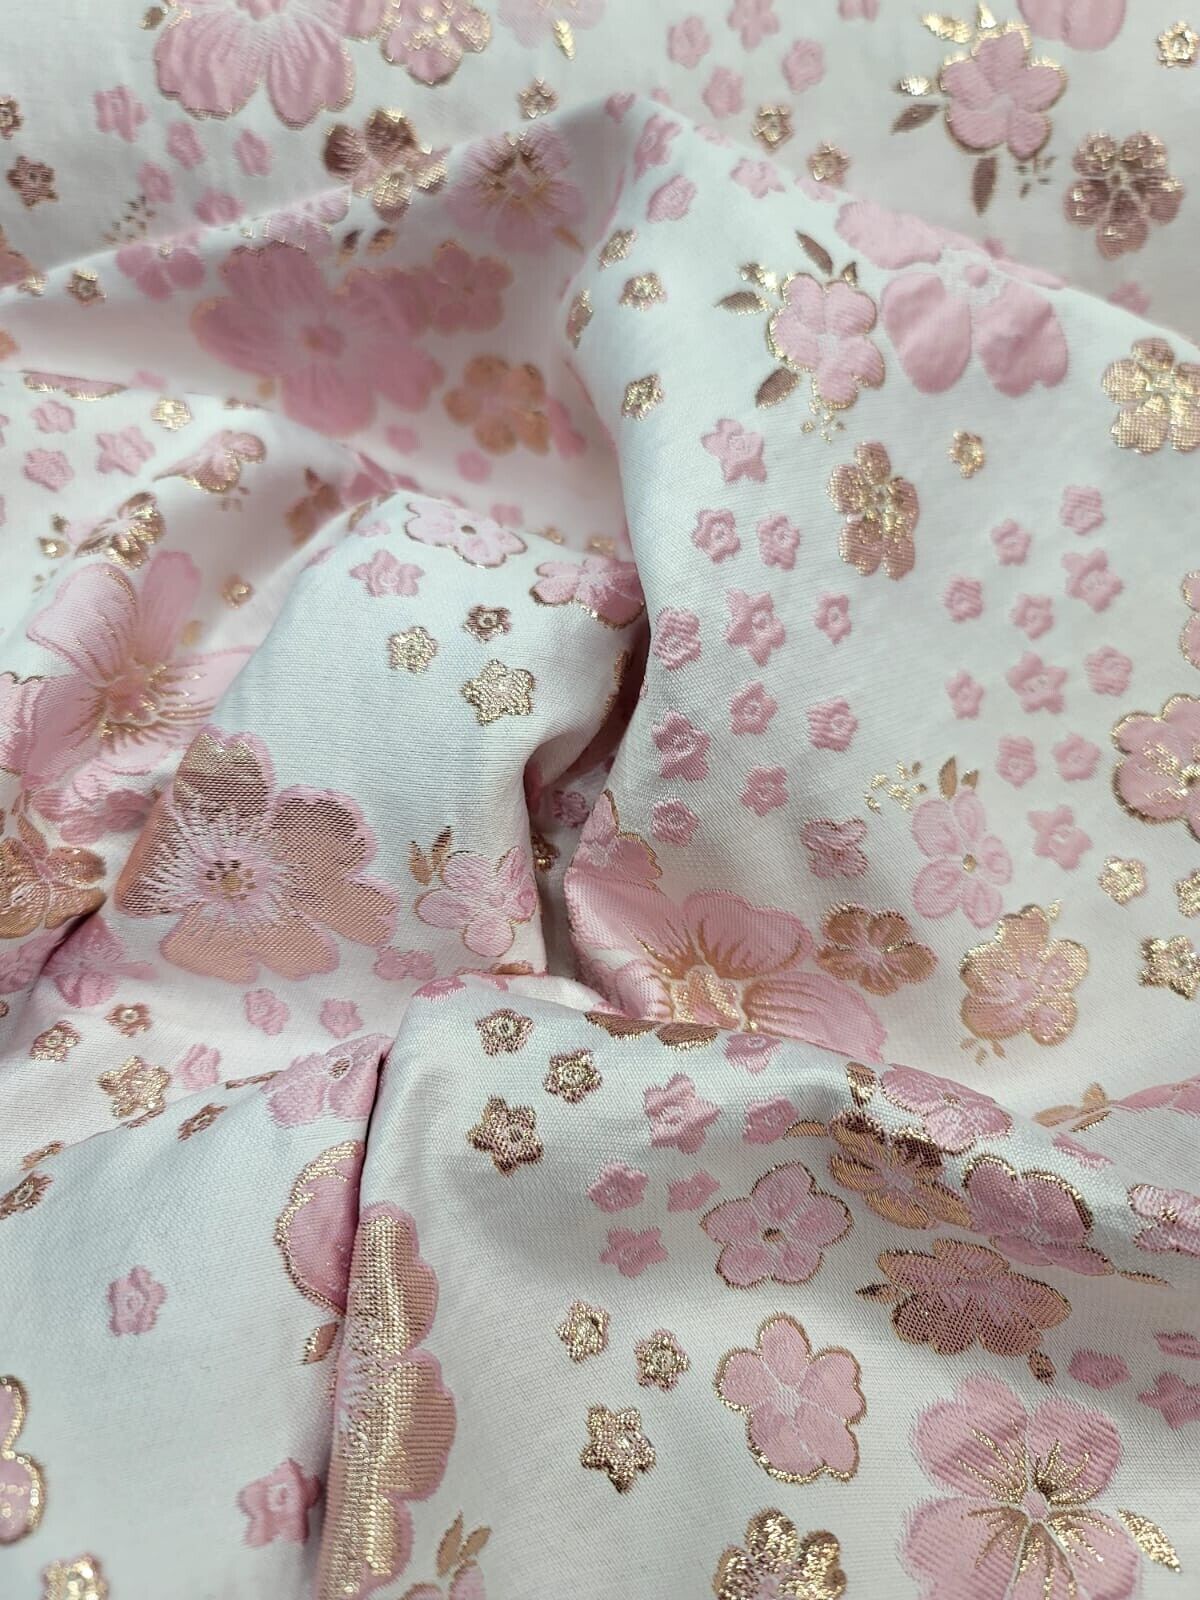 Pink and Gold Floral Brocade Fabric by the Yard - Stunning Rose Gold Metallic - Perfect for Elegance and Fashion